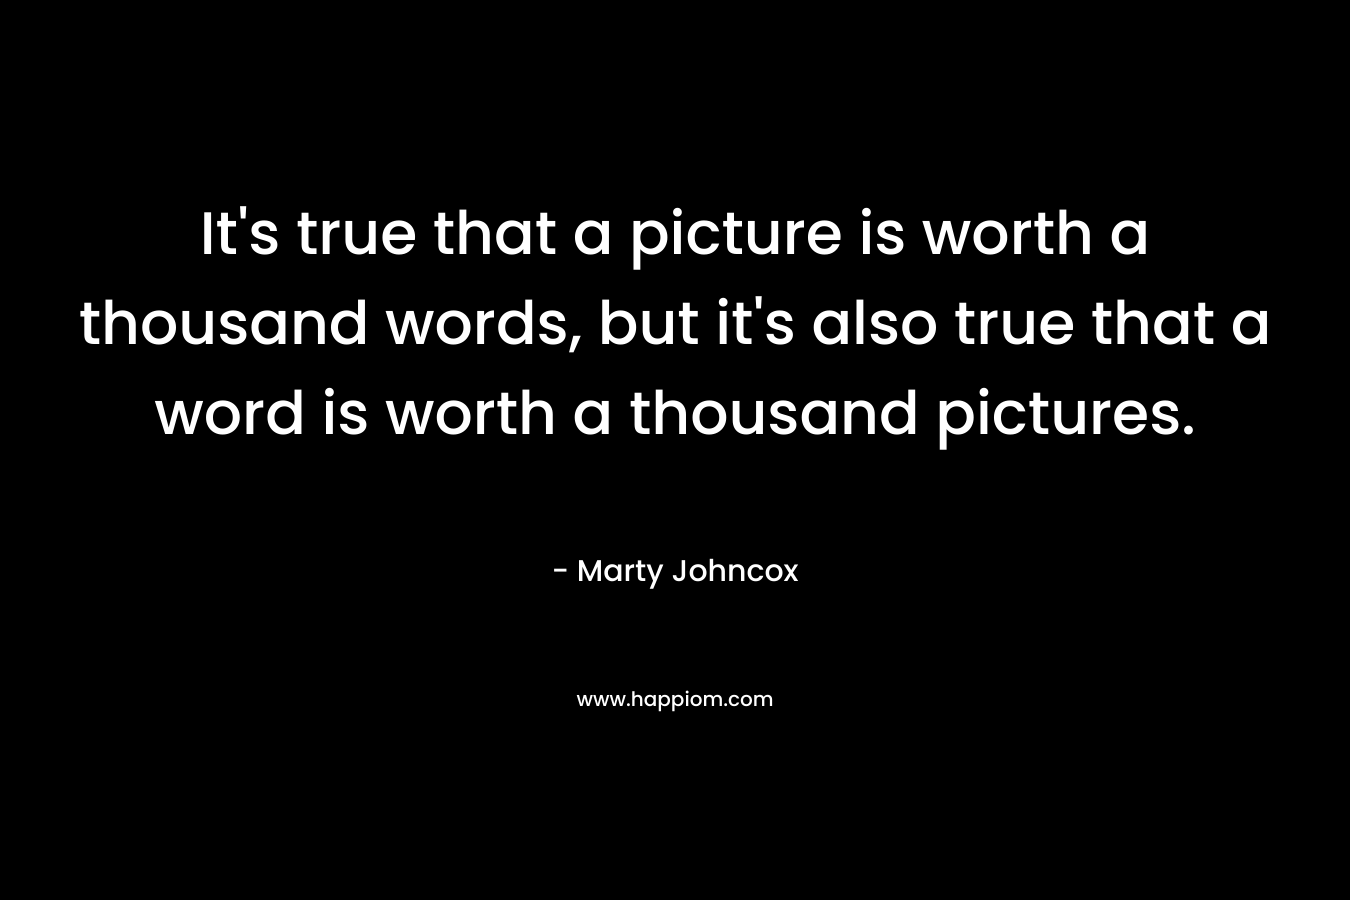 It's true that a picture is worth a thousand words, but it's also true that a word is worth a thousand pictures.